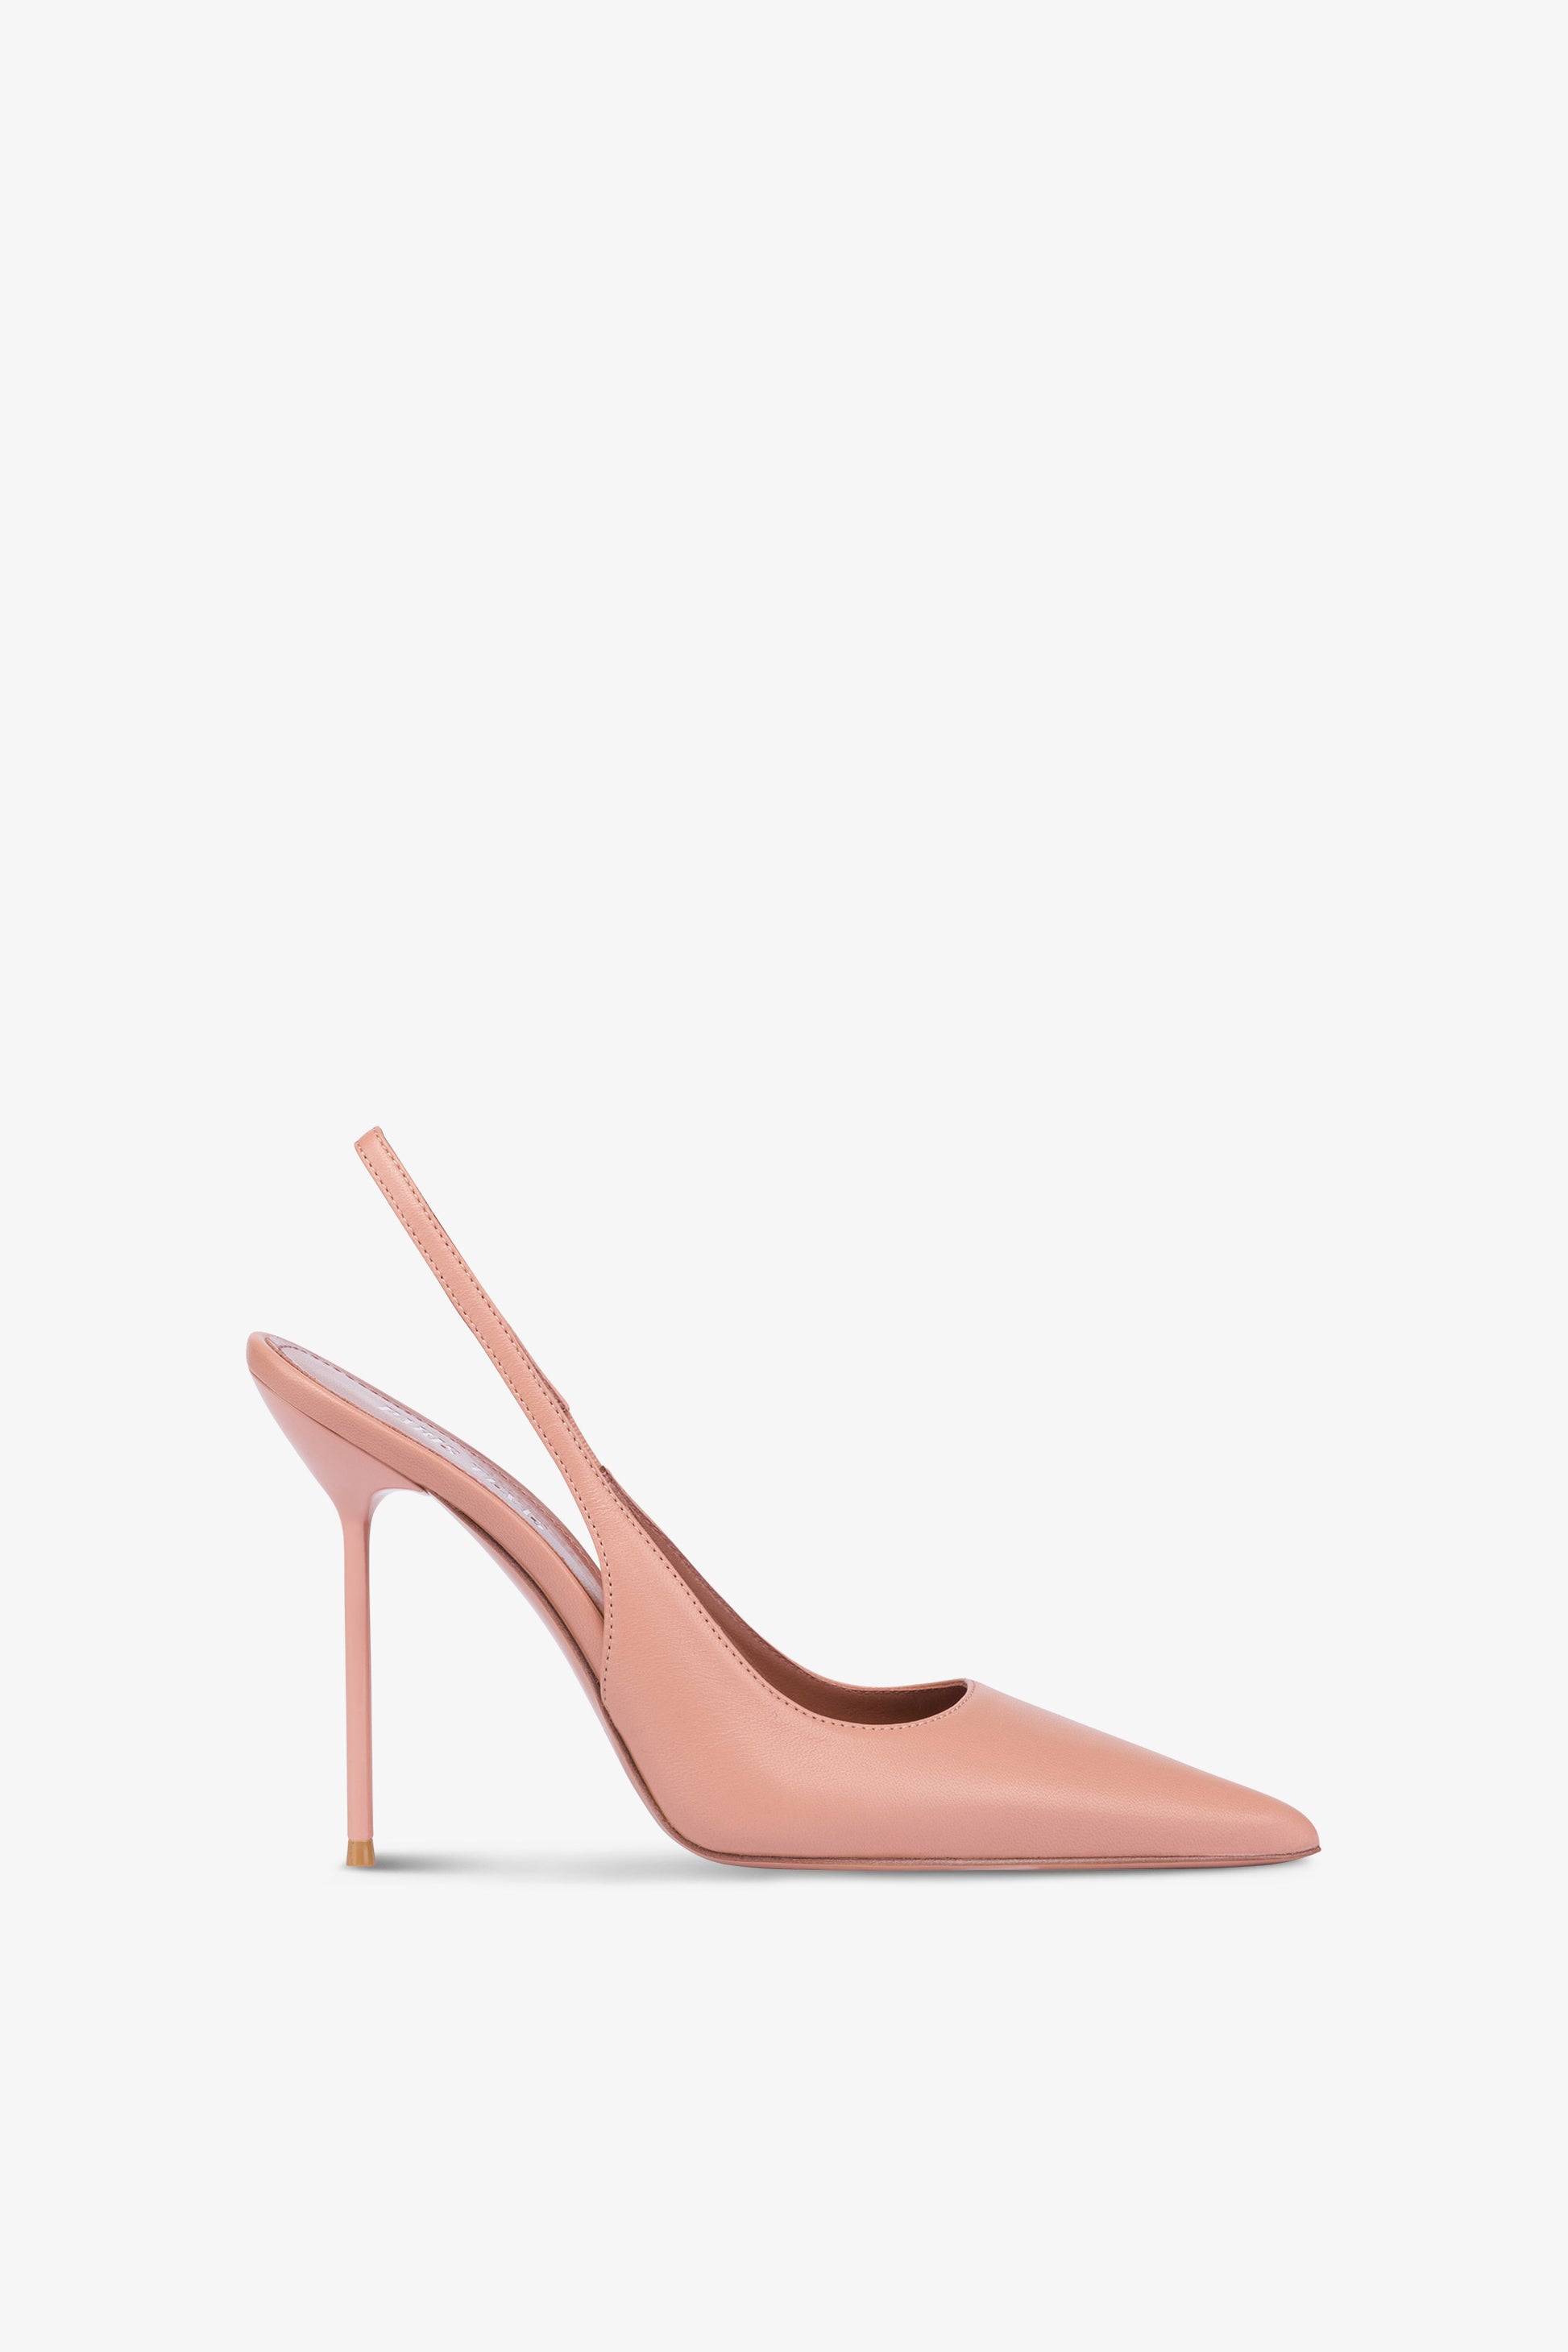 Sharp, pointed slingbacks in smooth romance leather